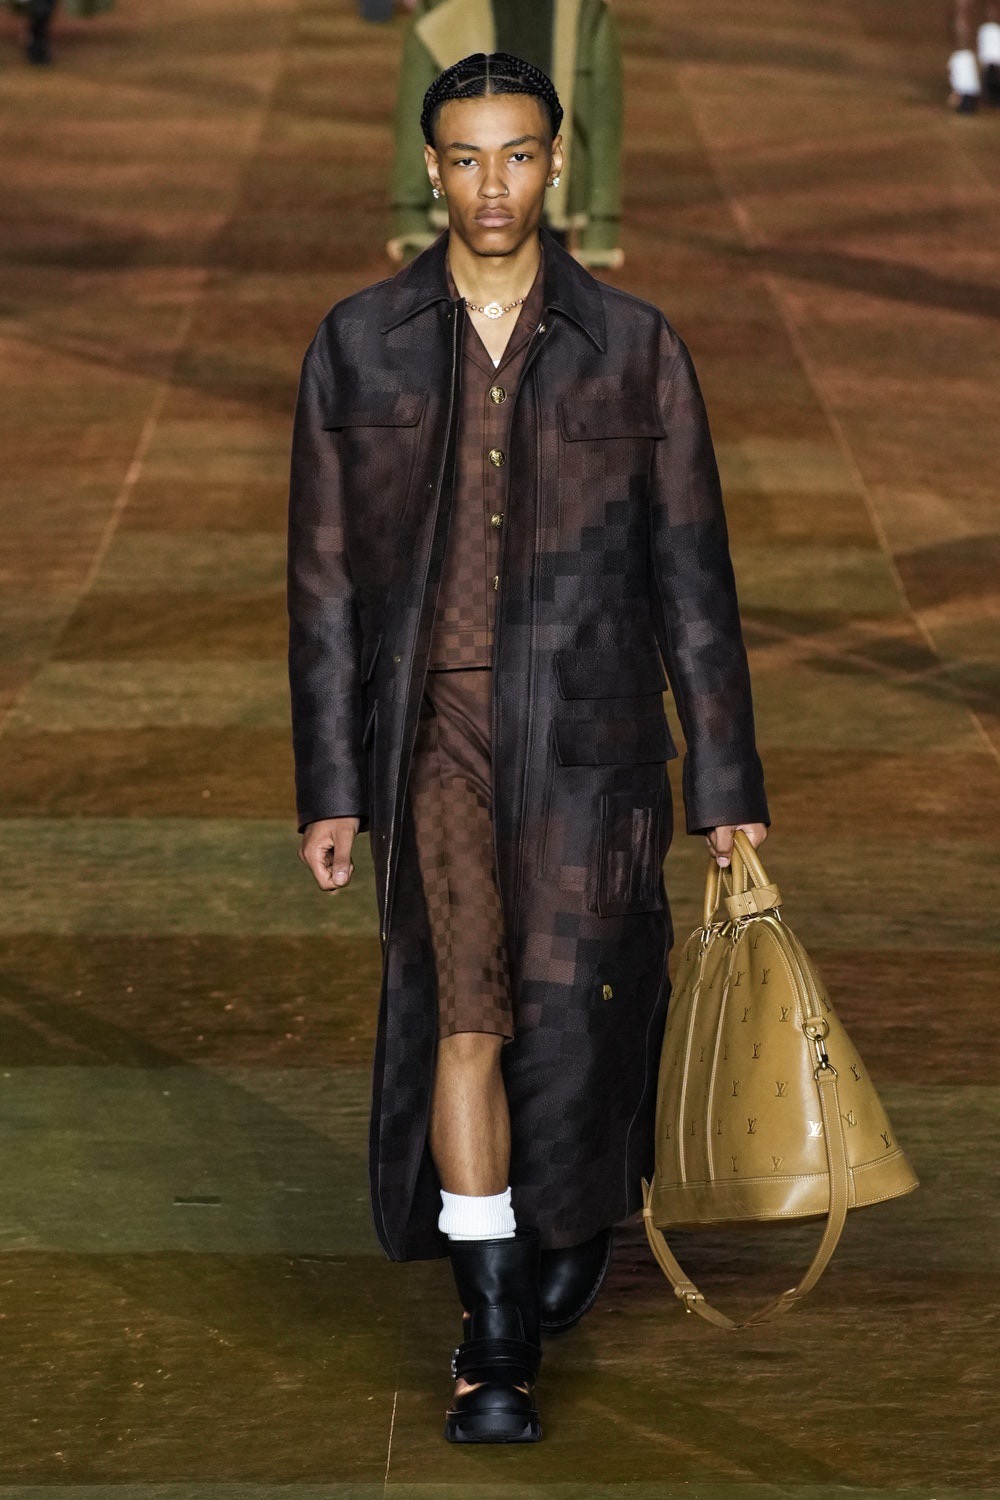 Louis Vuitton Wraps Up #PFW With A Luxurious FW 19 Street Wear Collection  For Its Global Tribe